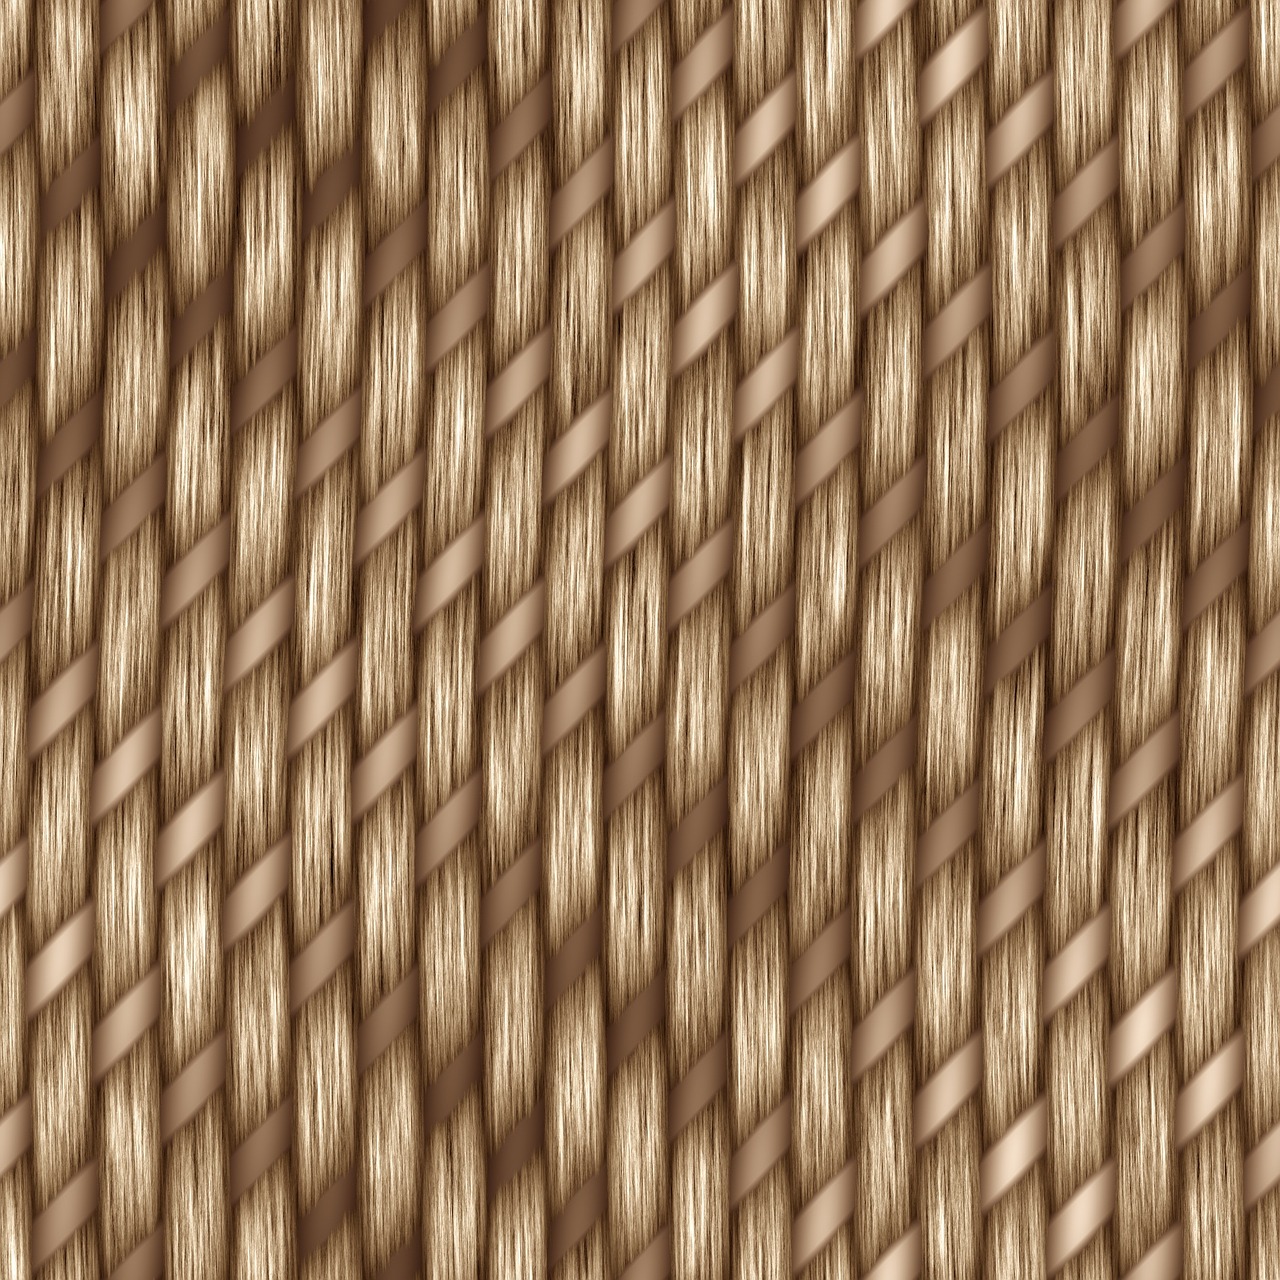 woven rope texture textures free photo